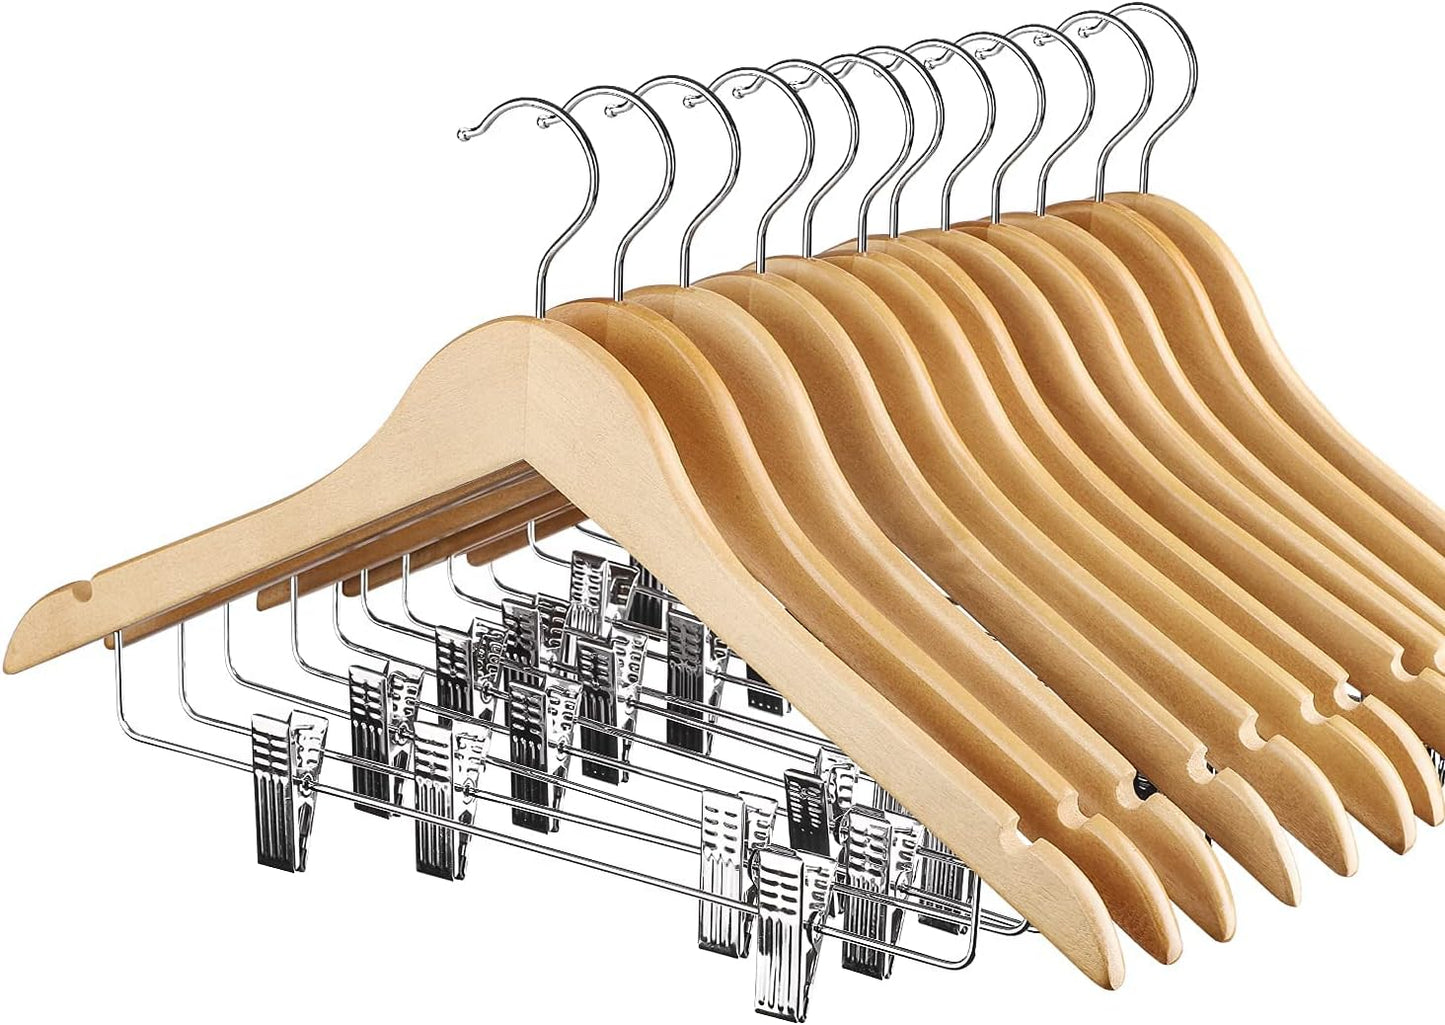 HOUSE DAY High-Grade Wooden Suit Hangers Skirt Hangers with Clips 12 Pack Natural